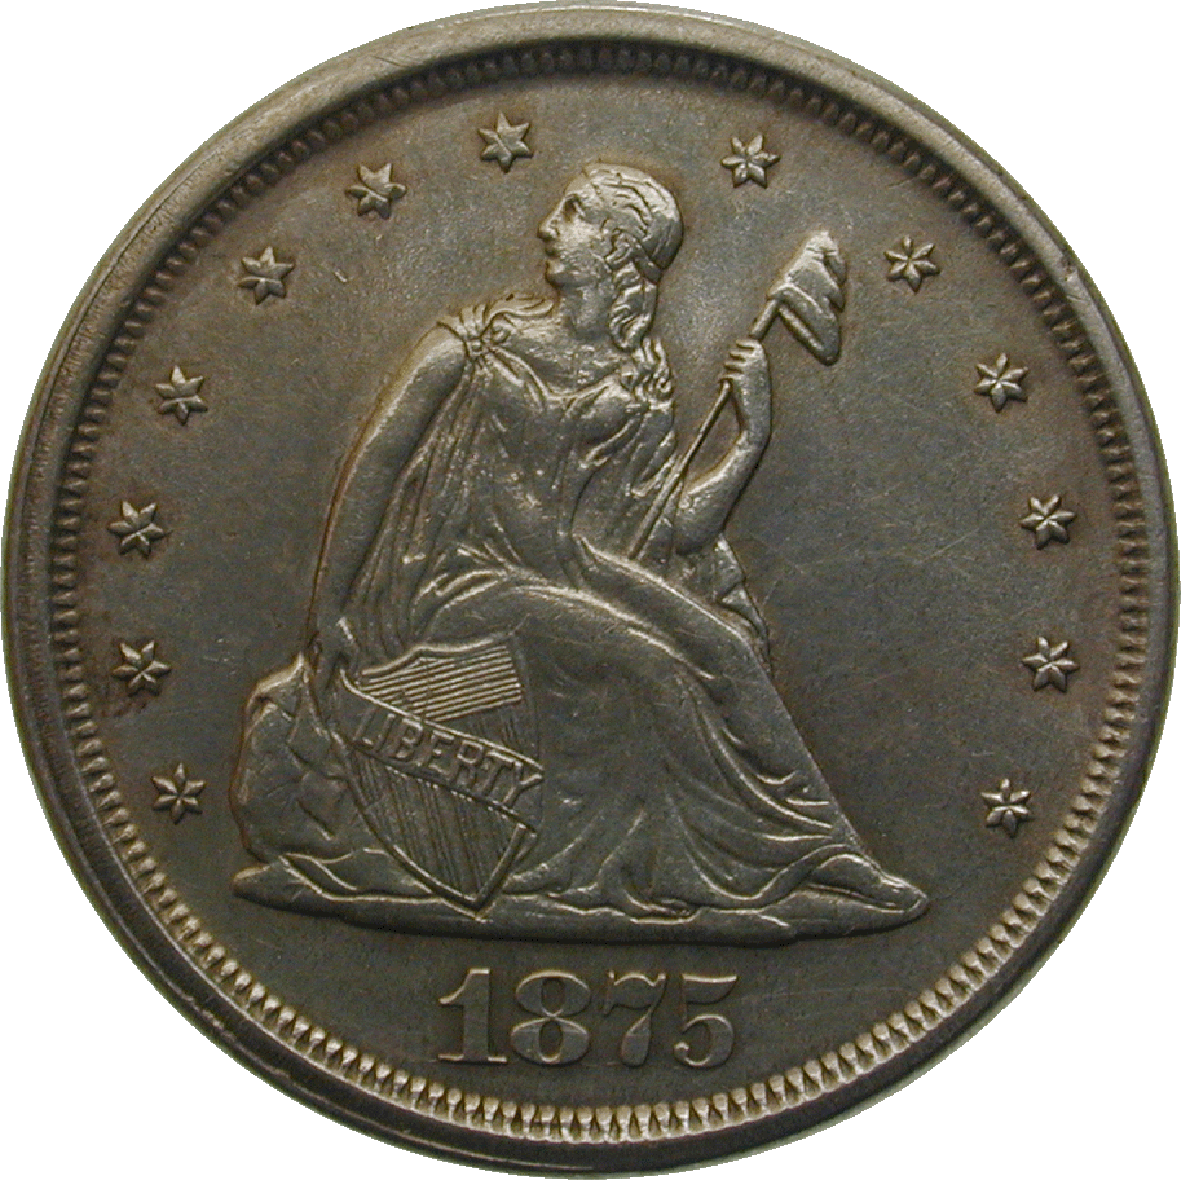 United States of America, 20 Cents 1875 (obverse)